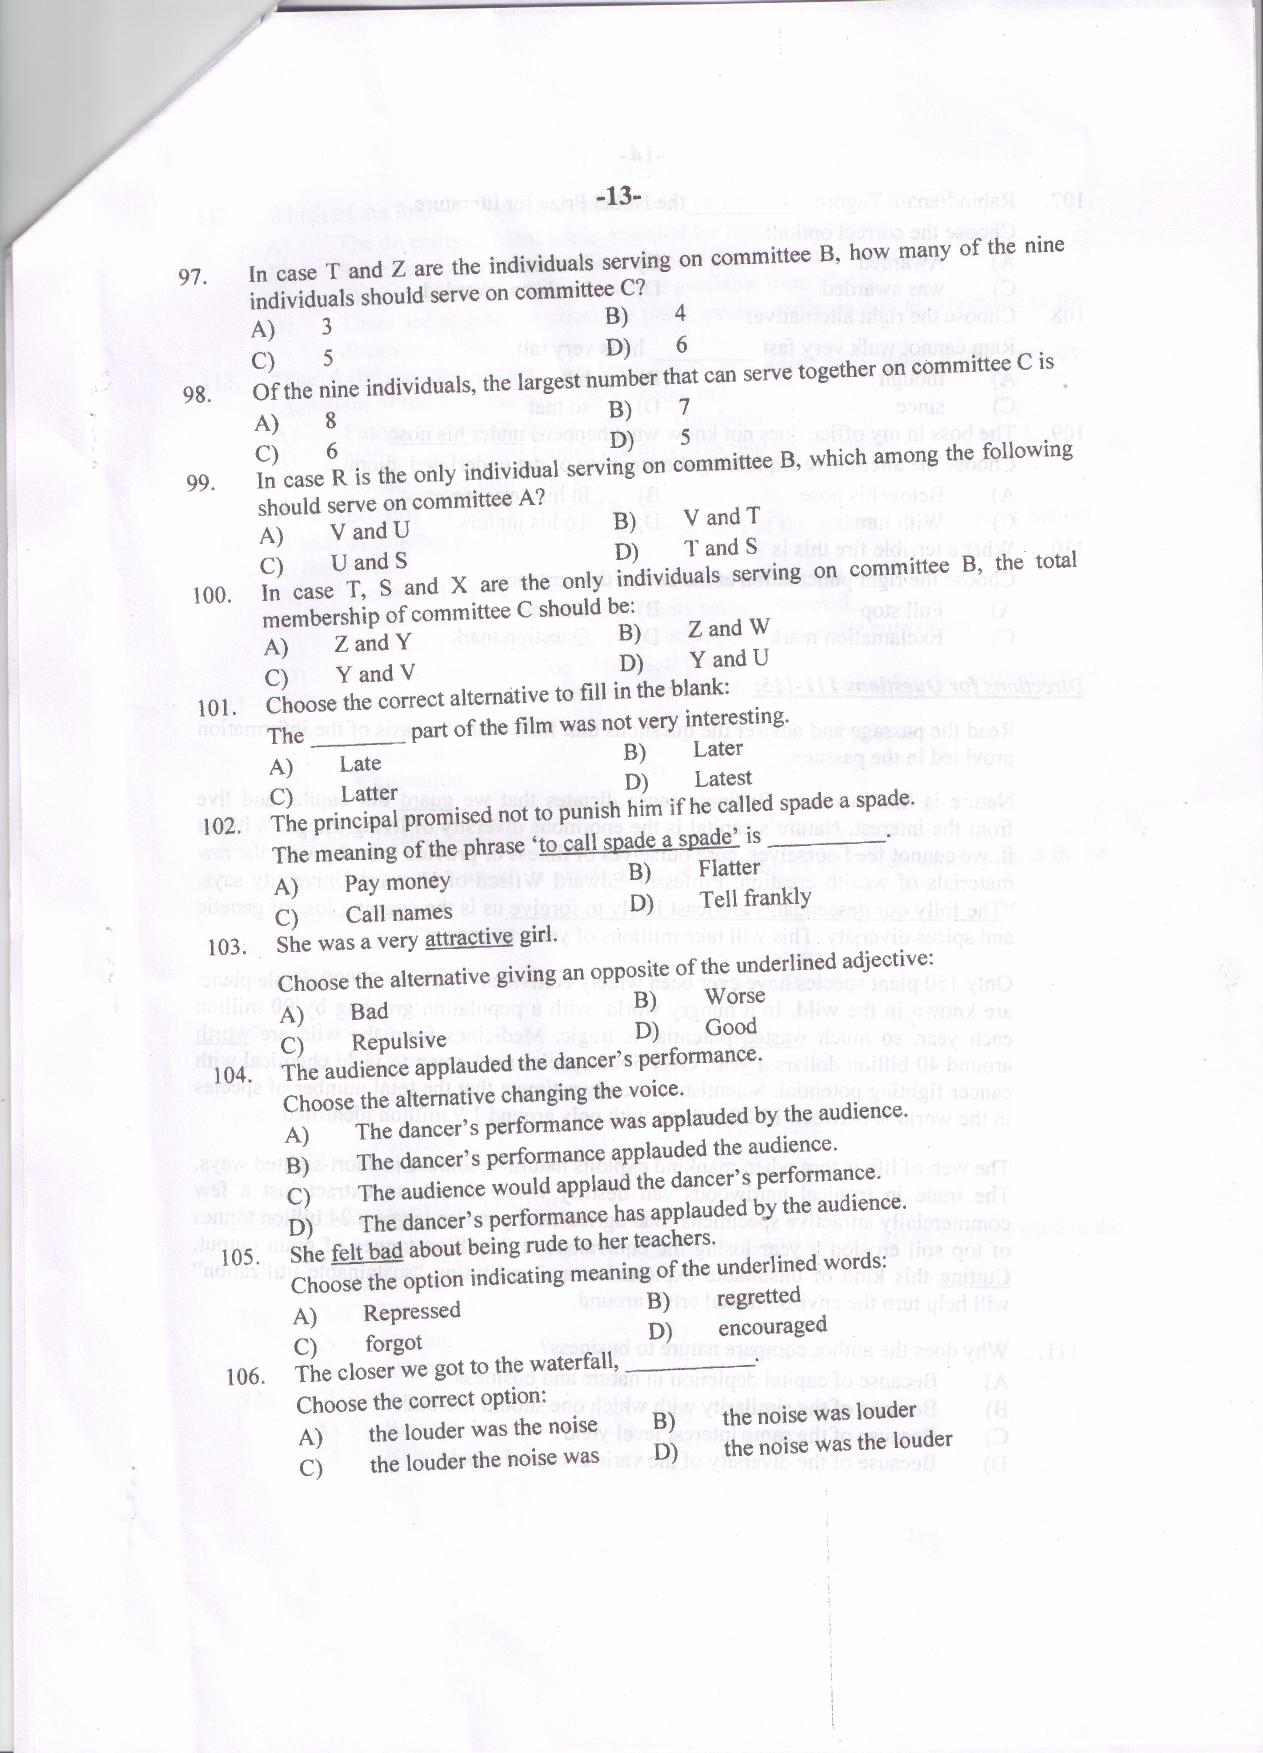 PU MET 2014 Question Booklet with Key - Page 13